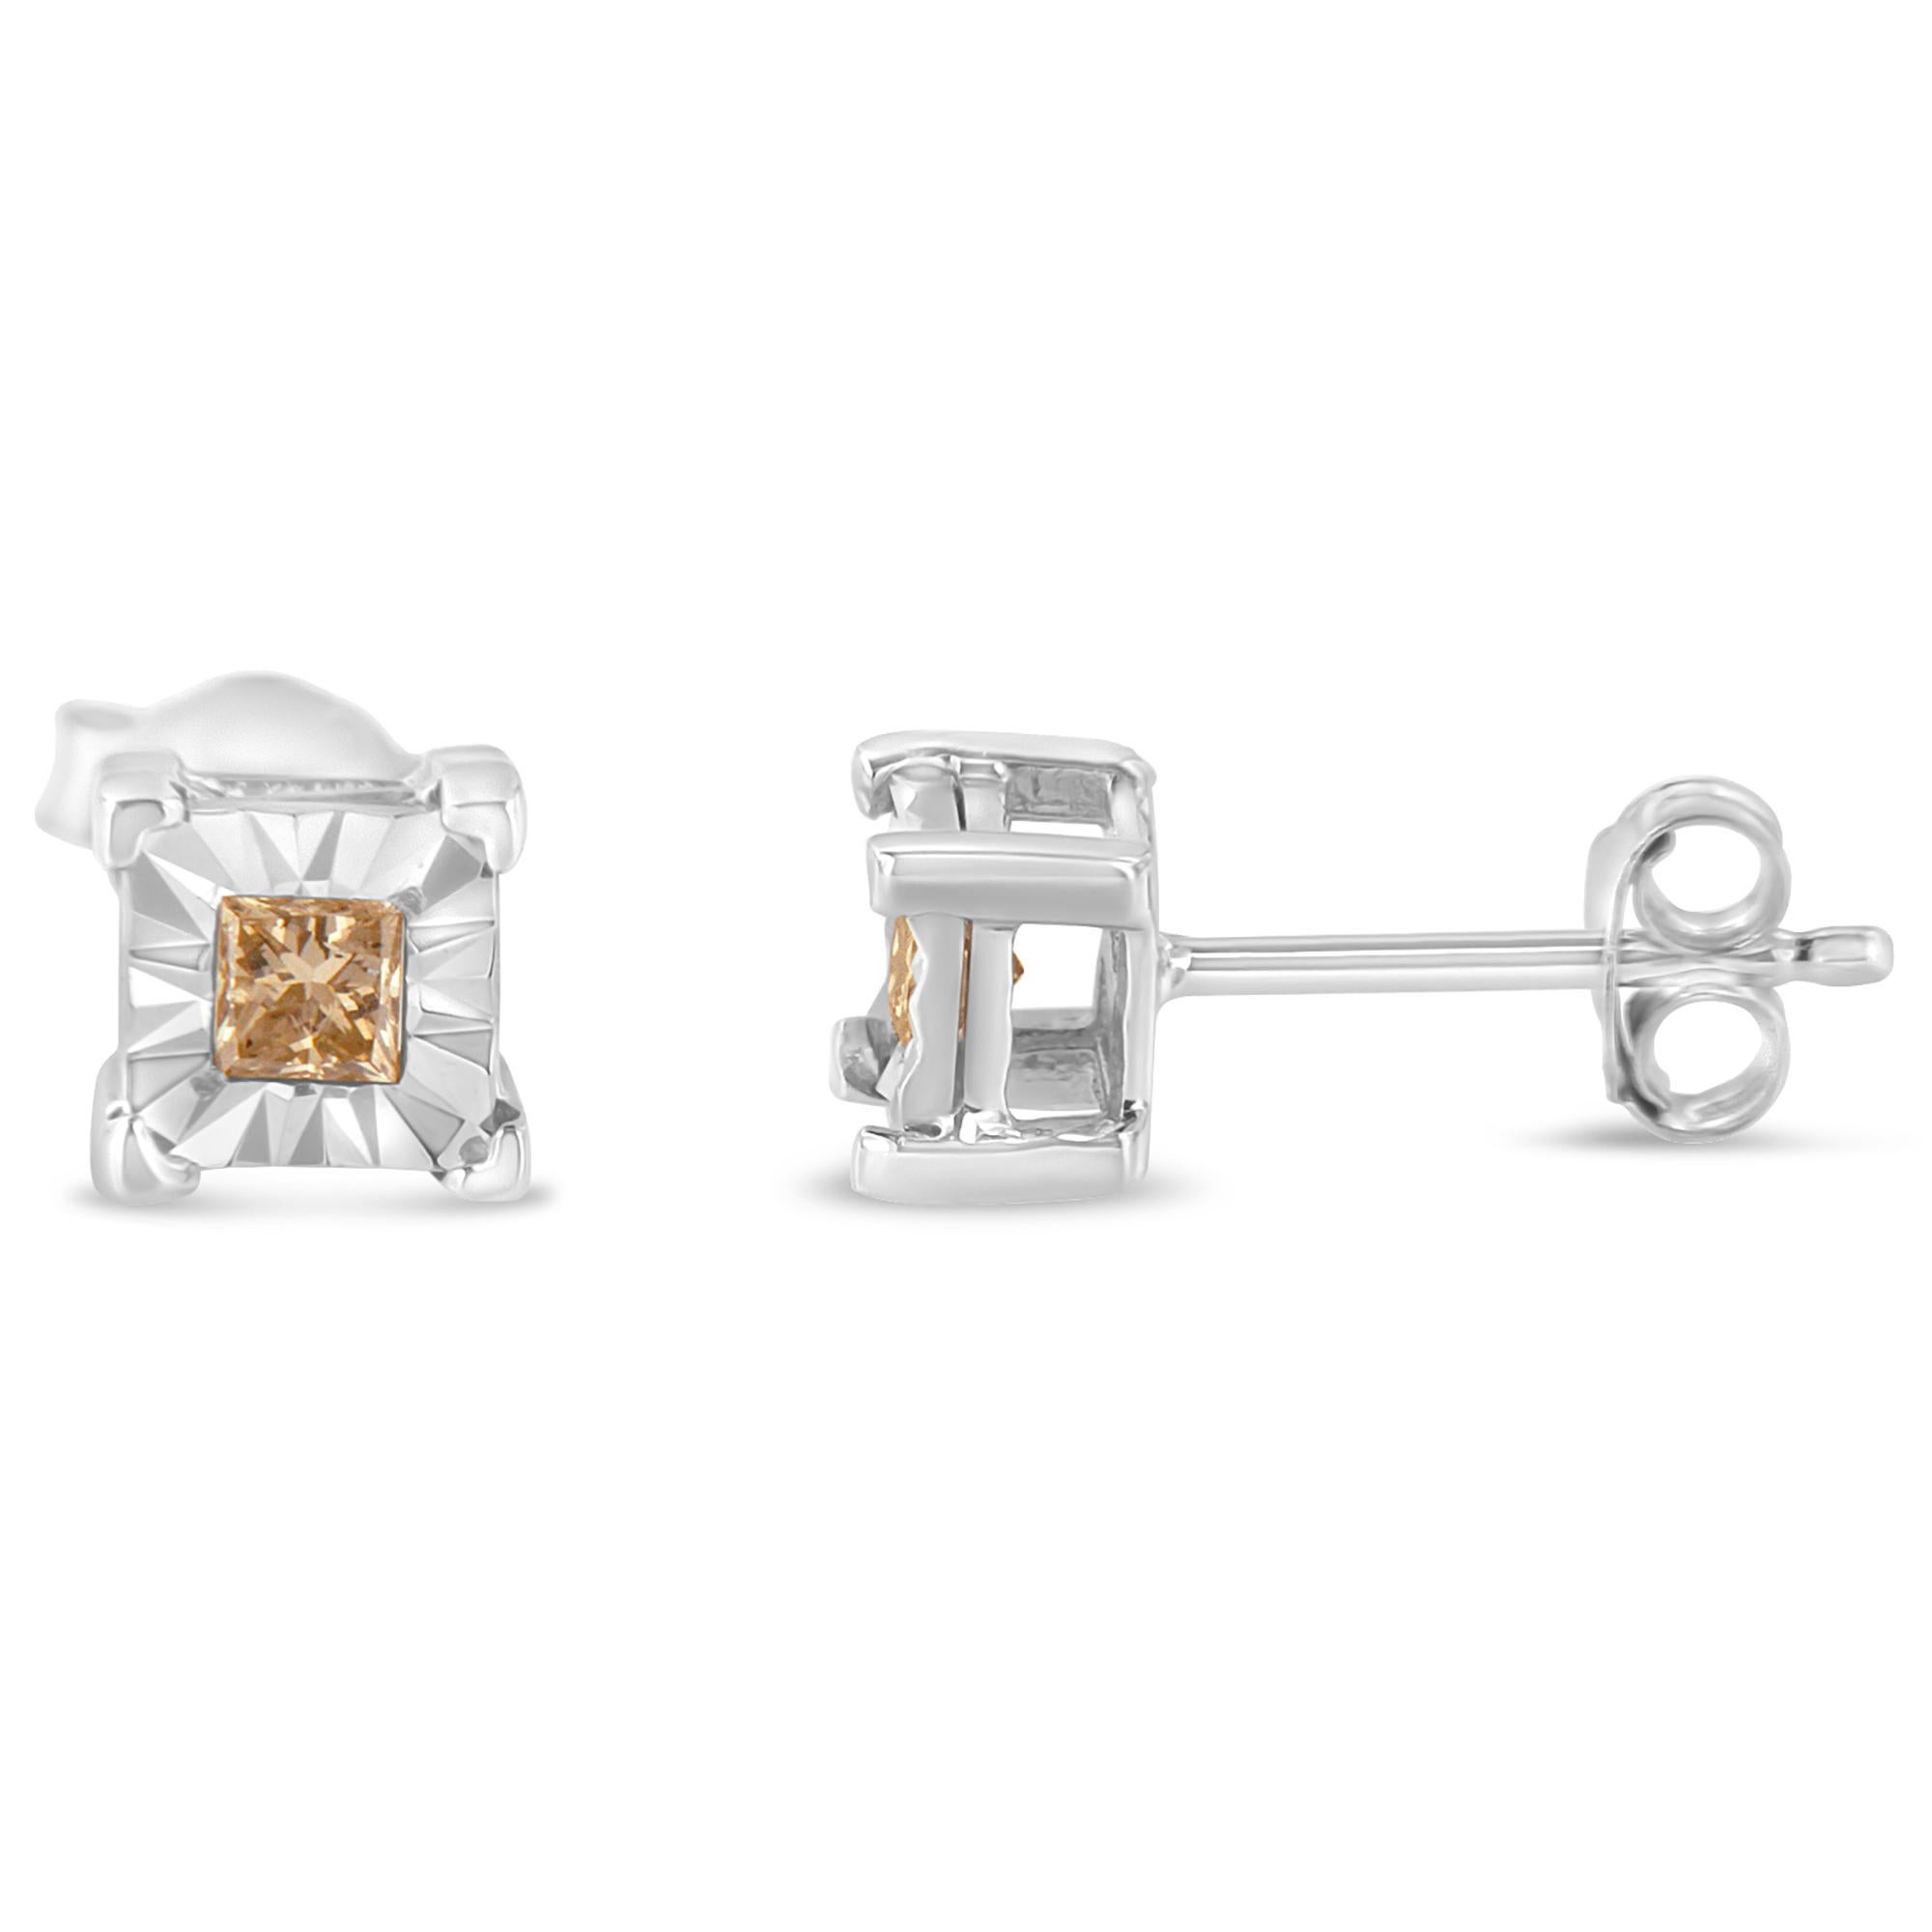 Two gorgeous white diamonds sit in a prong setting on these sparkling stud earrings. Crafted in sterling silver, these diamond stud earrings feature a high polish finish. These stunning silver earrings feature 3/8 carats of lovely champagne